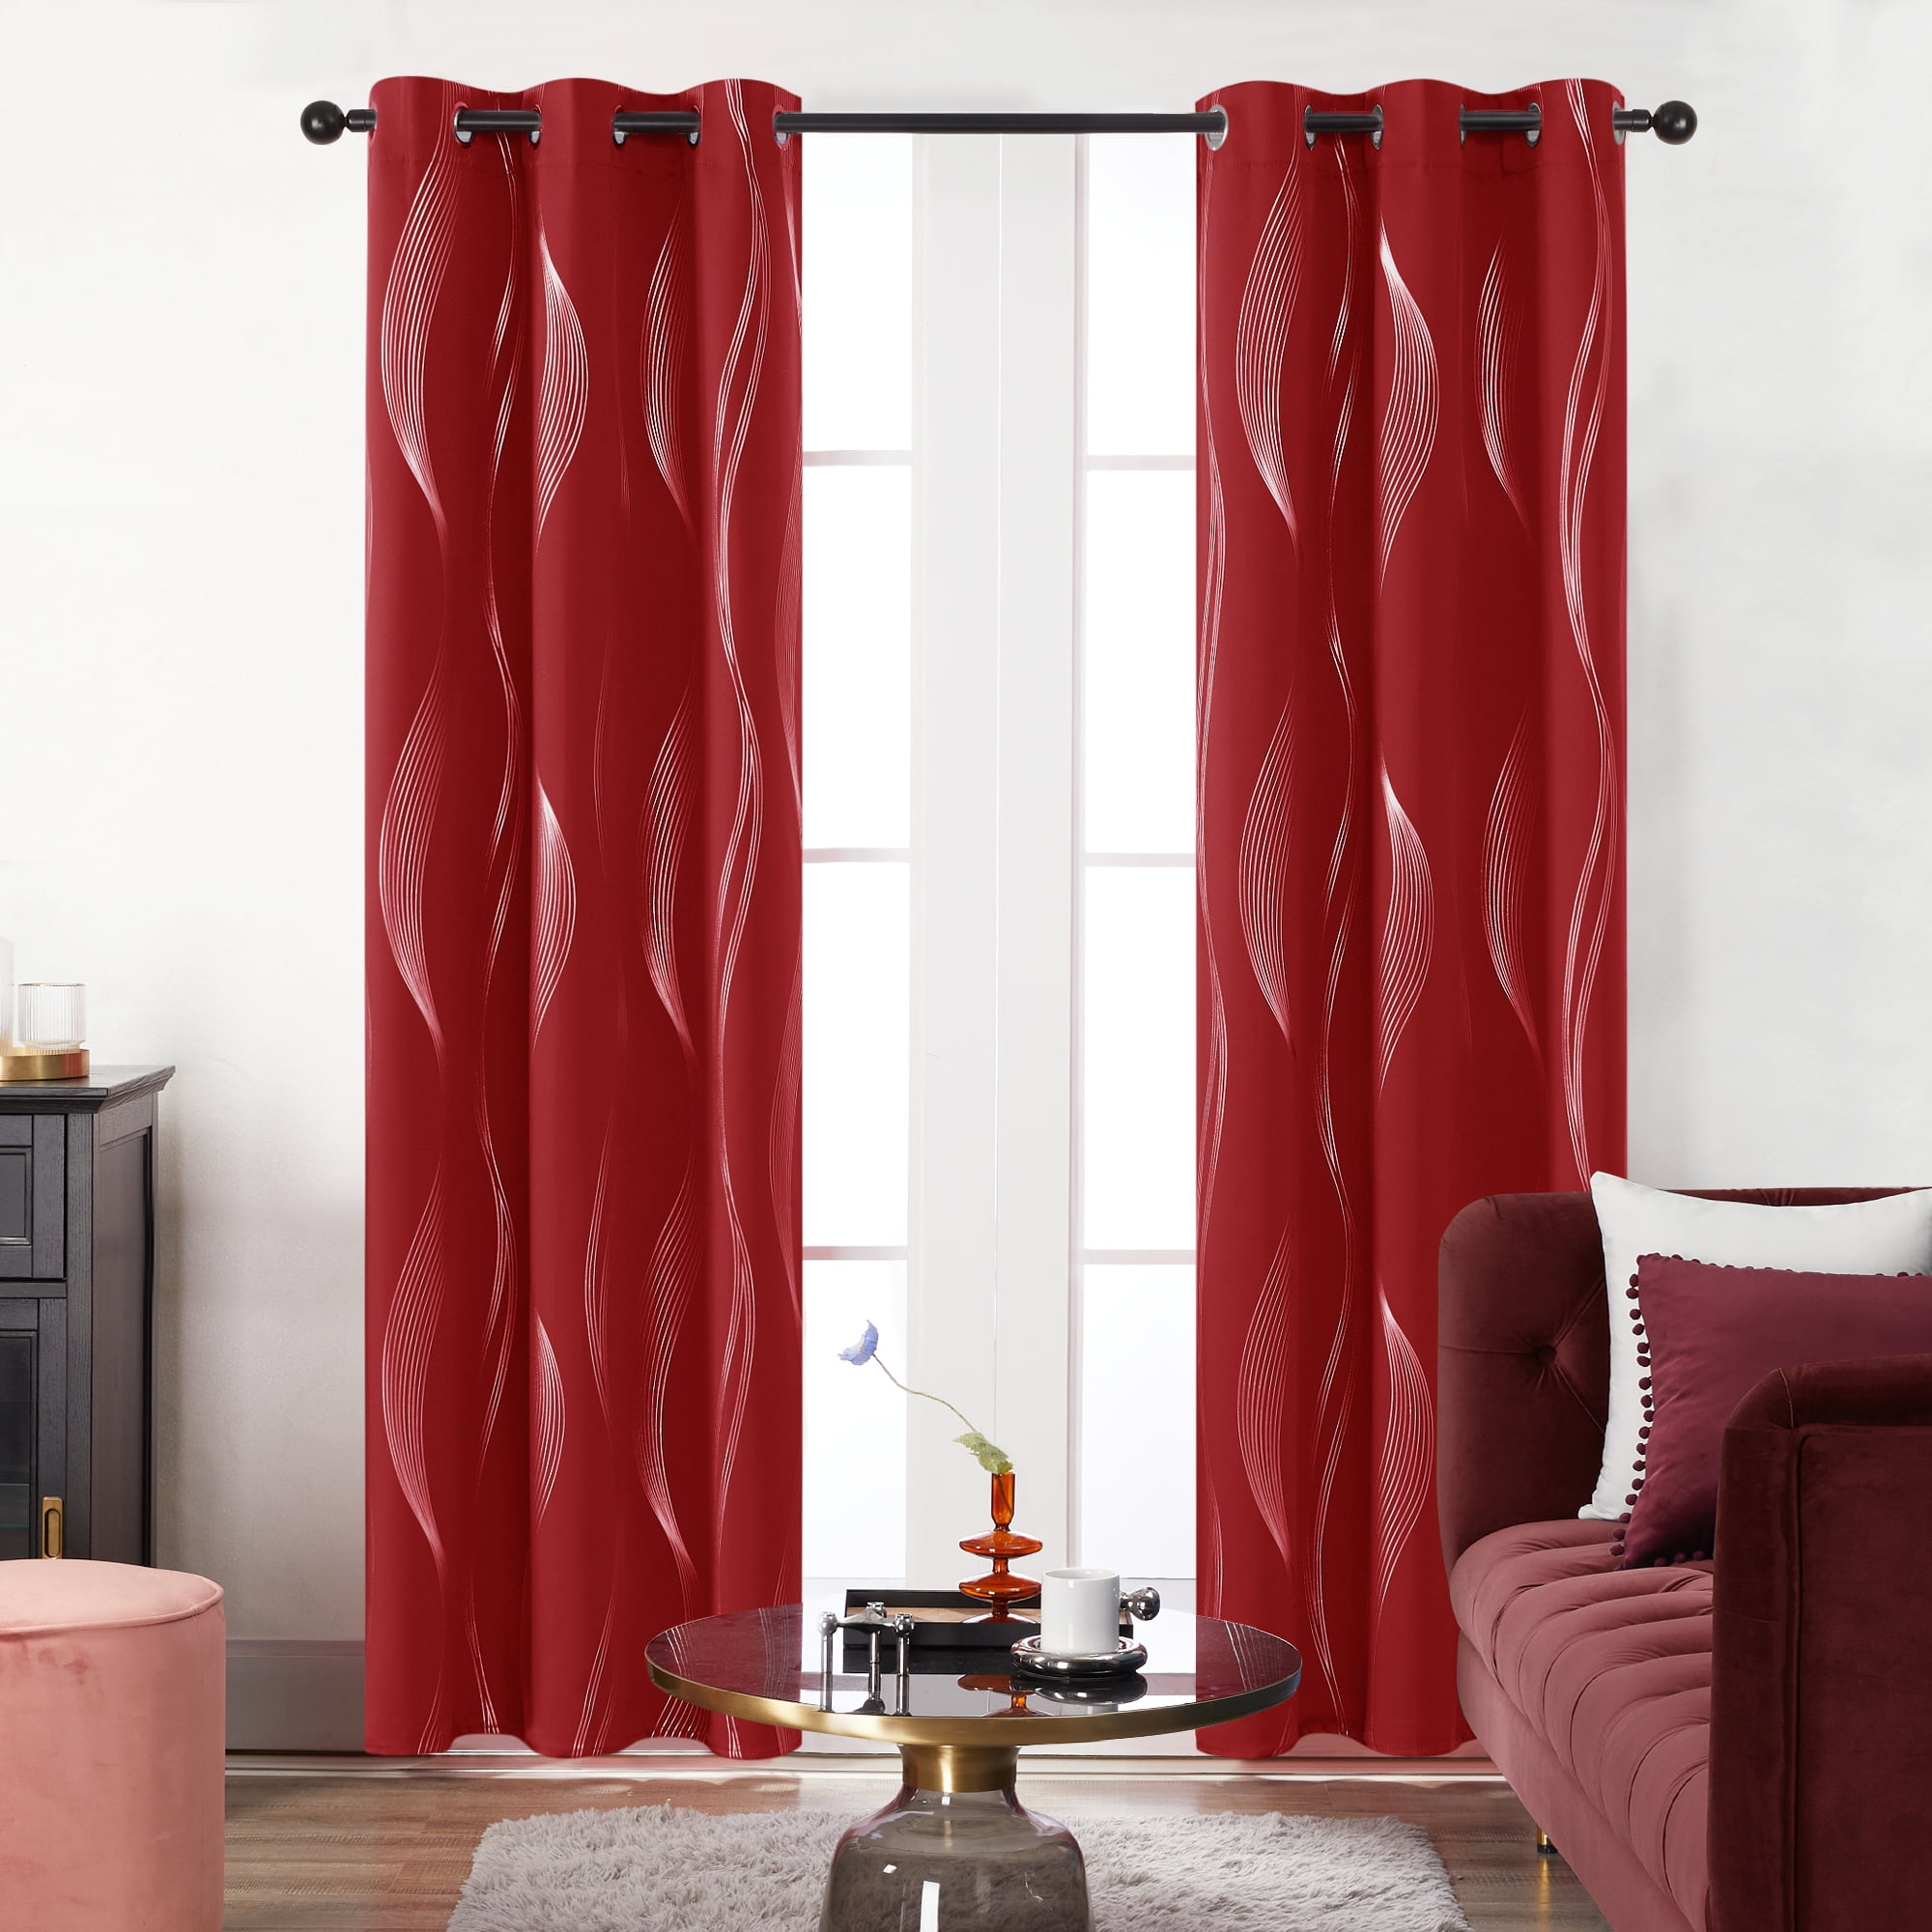 2 Panels Blackout Window Curtains Thermal Insulated Drapes for Bedroom 42" 